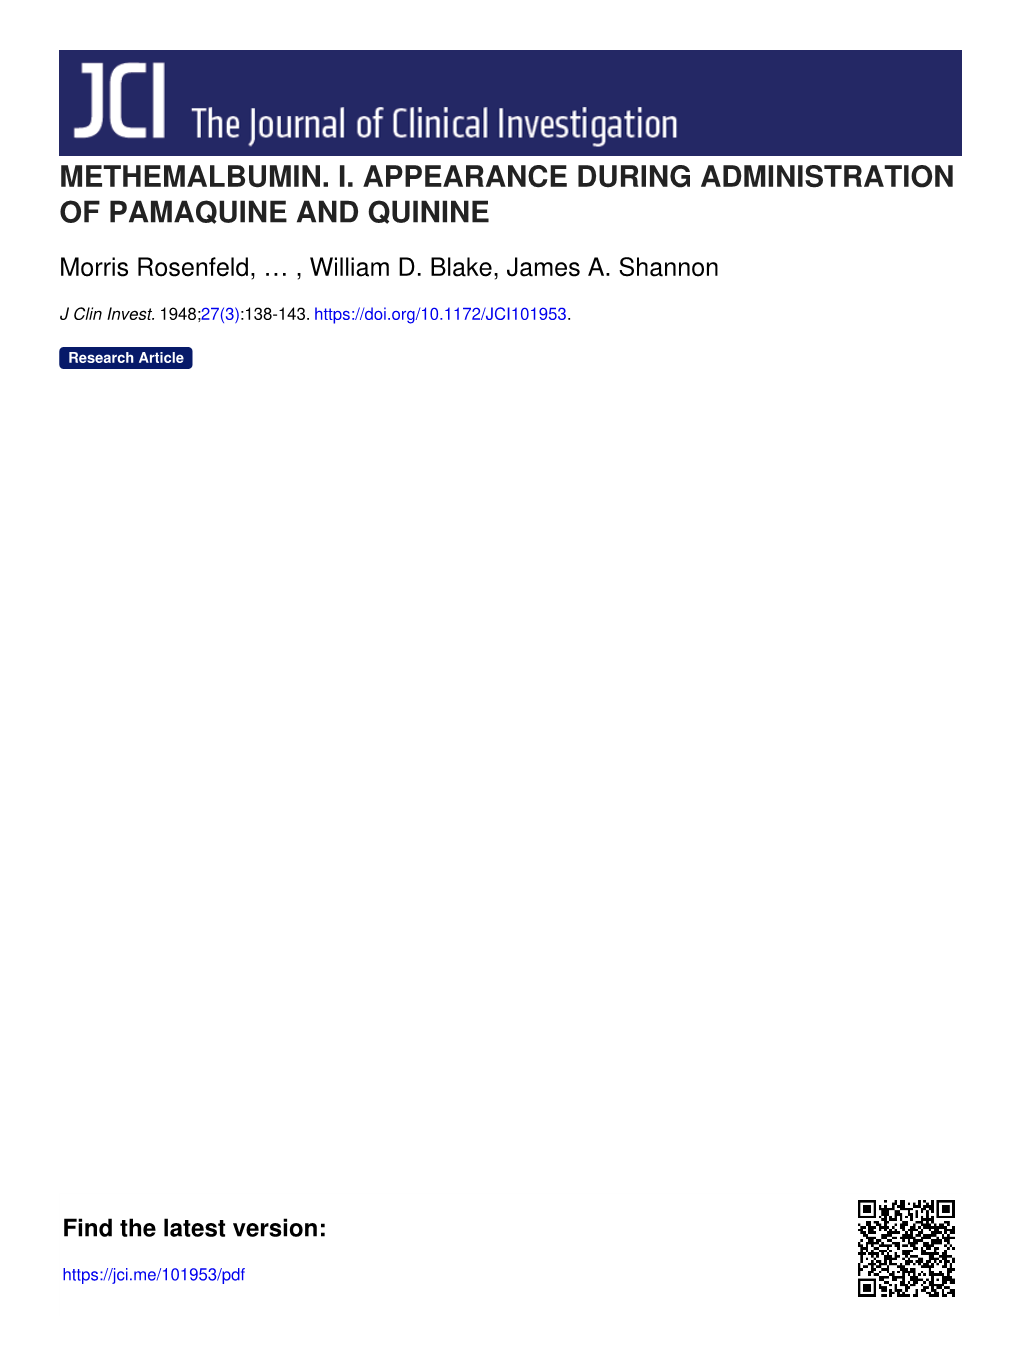 Methemalbumin. I. Appearance During Administration of Pamaquine and Quinine